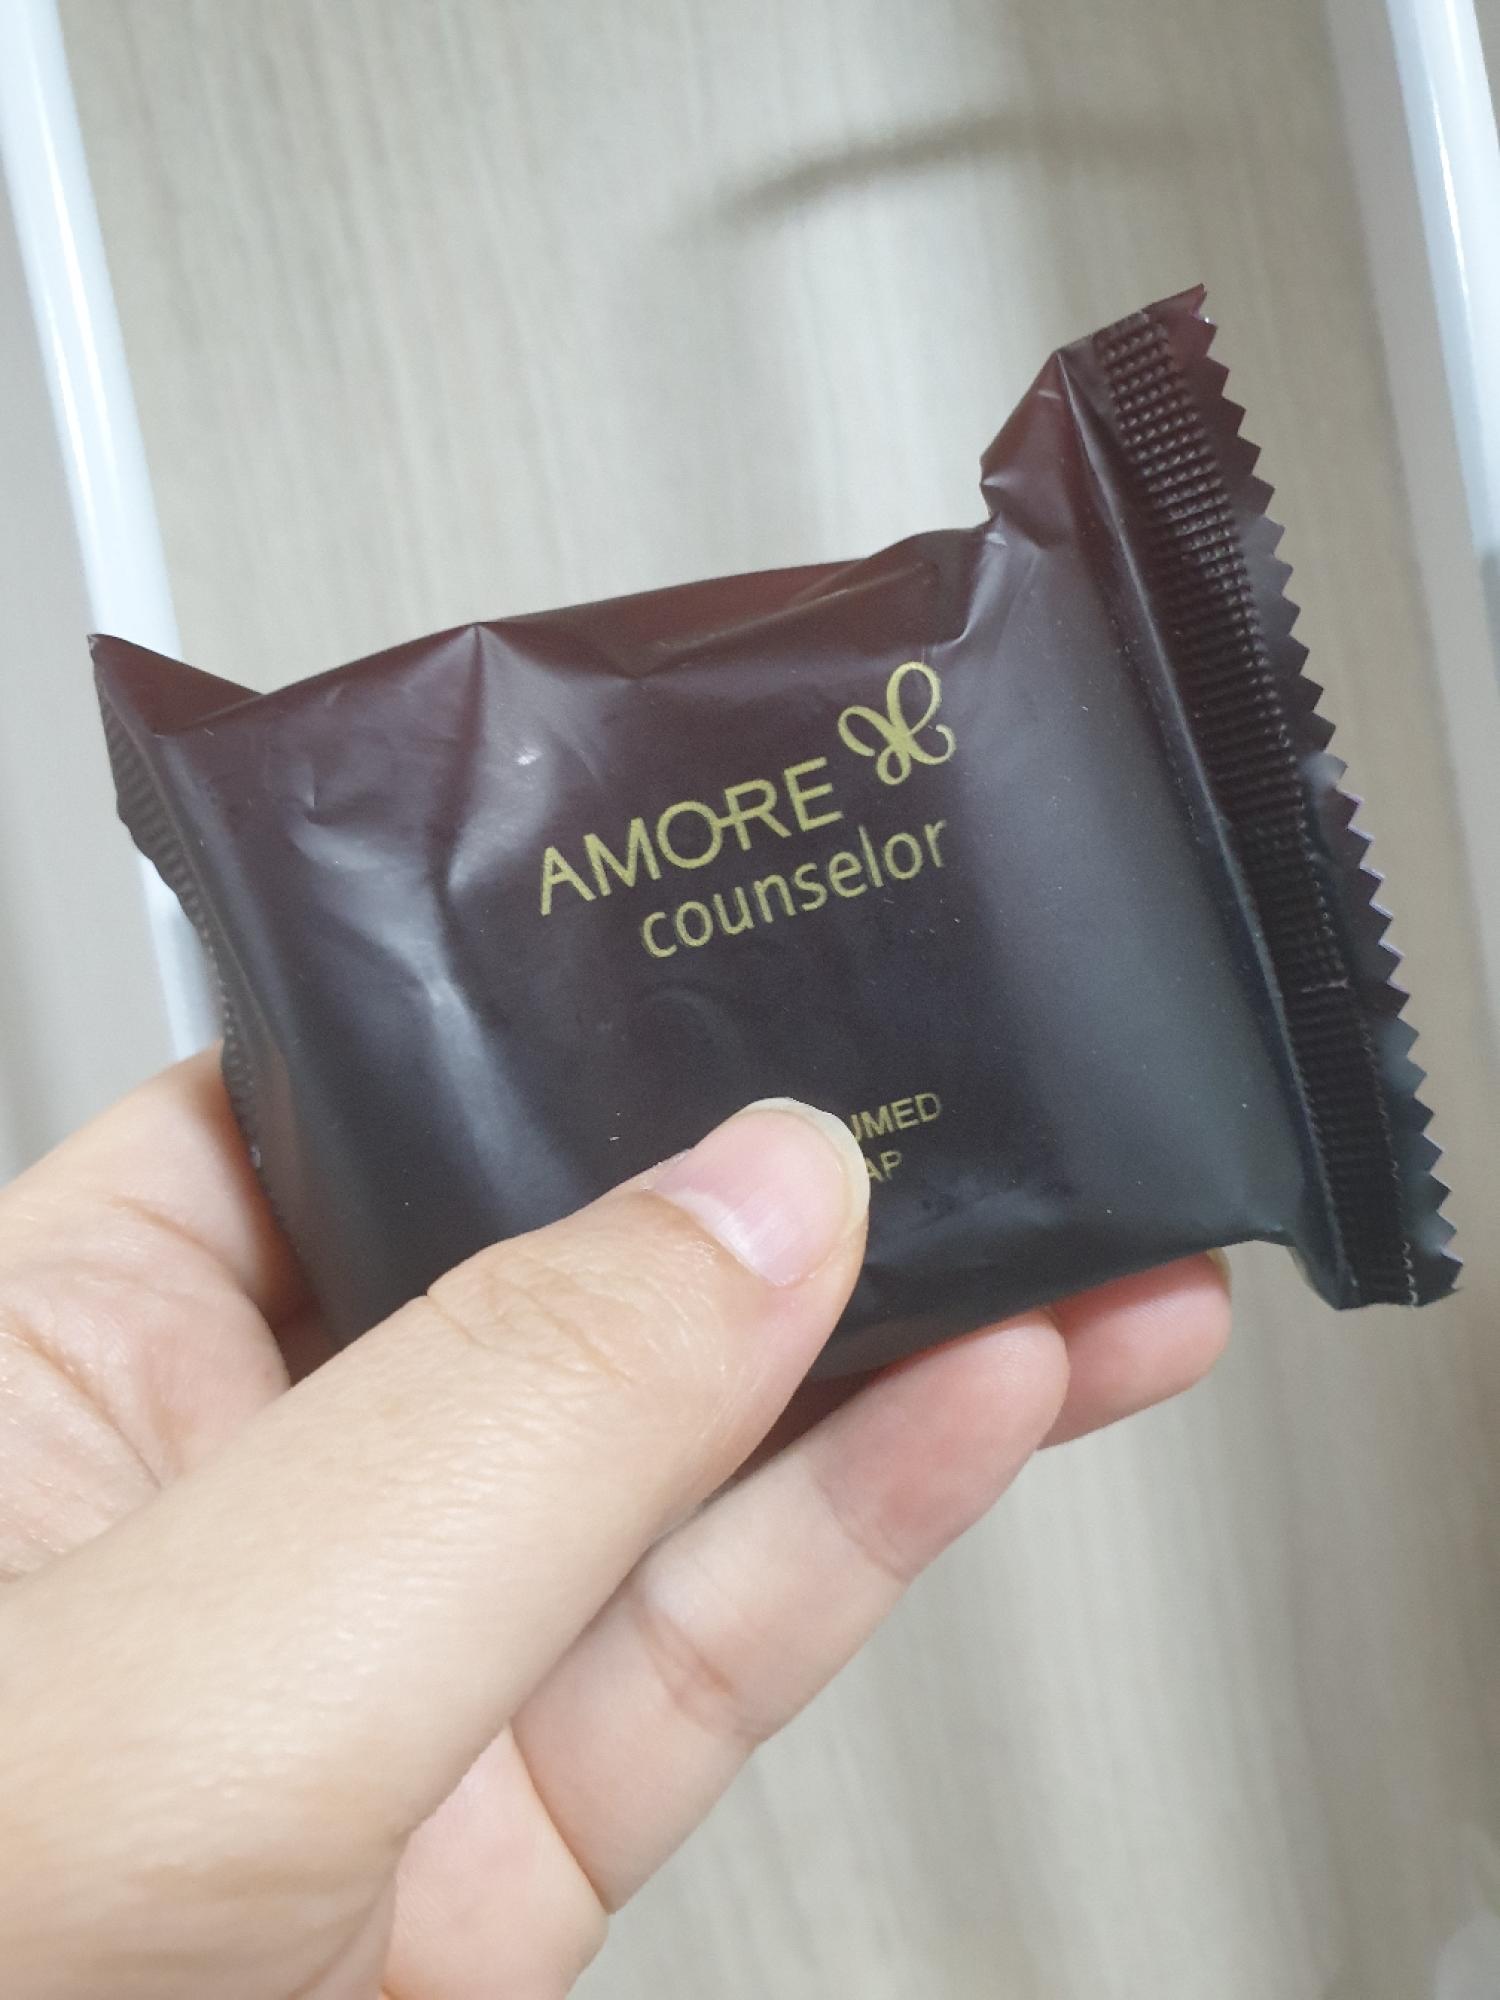 10 Pieces AMORE Counselor Perfumed Bar Soaps Body Facial Skincare